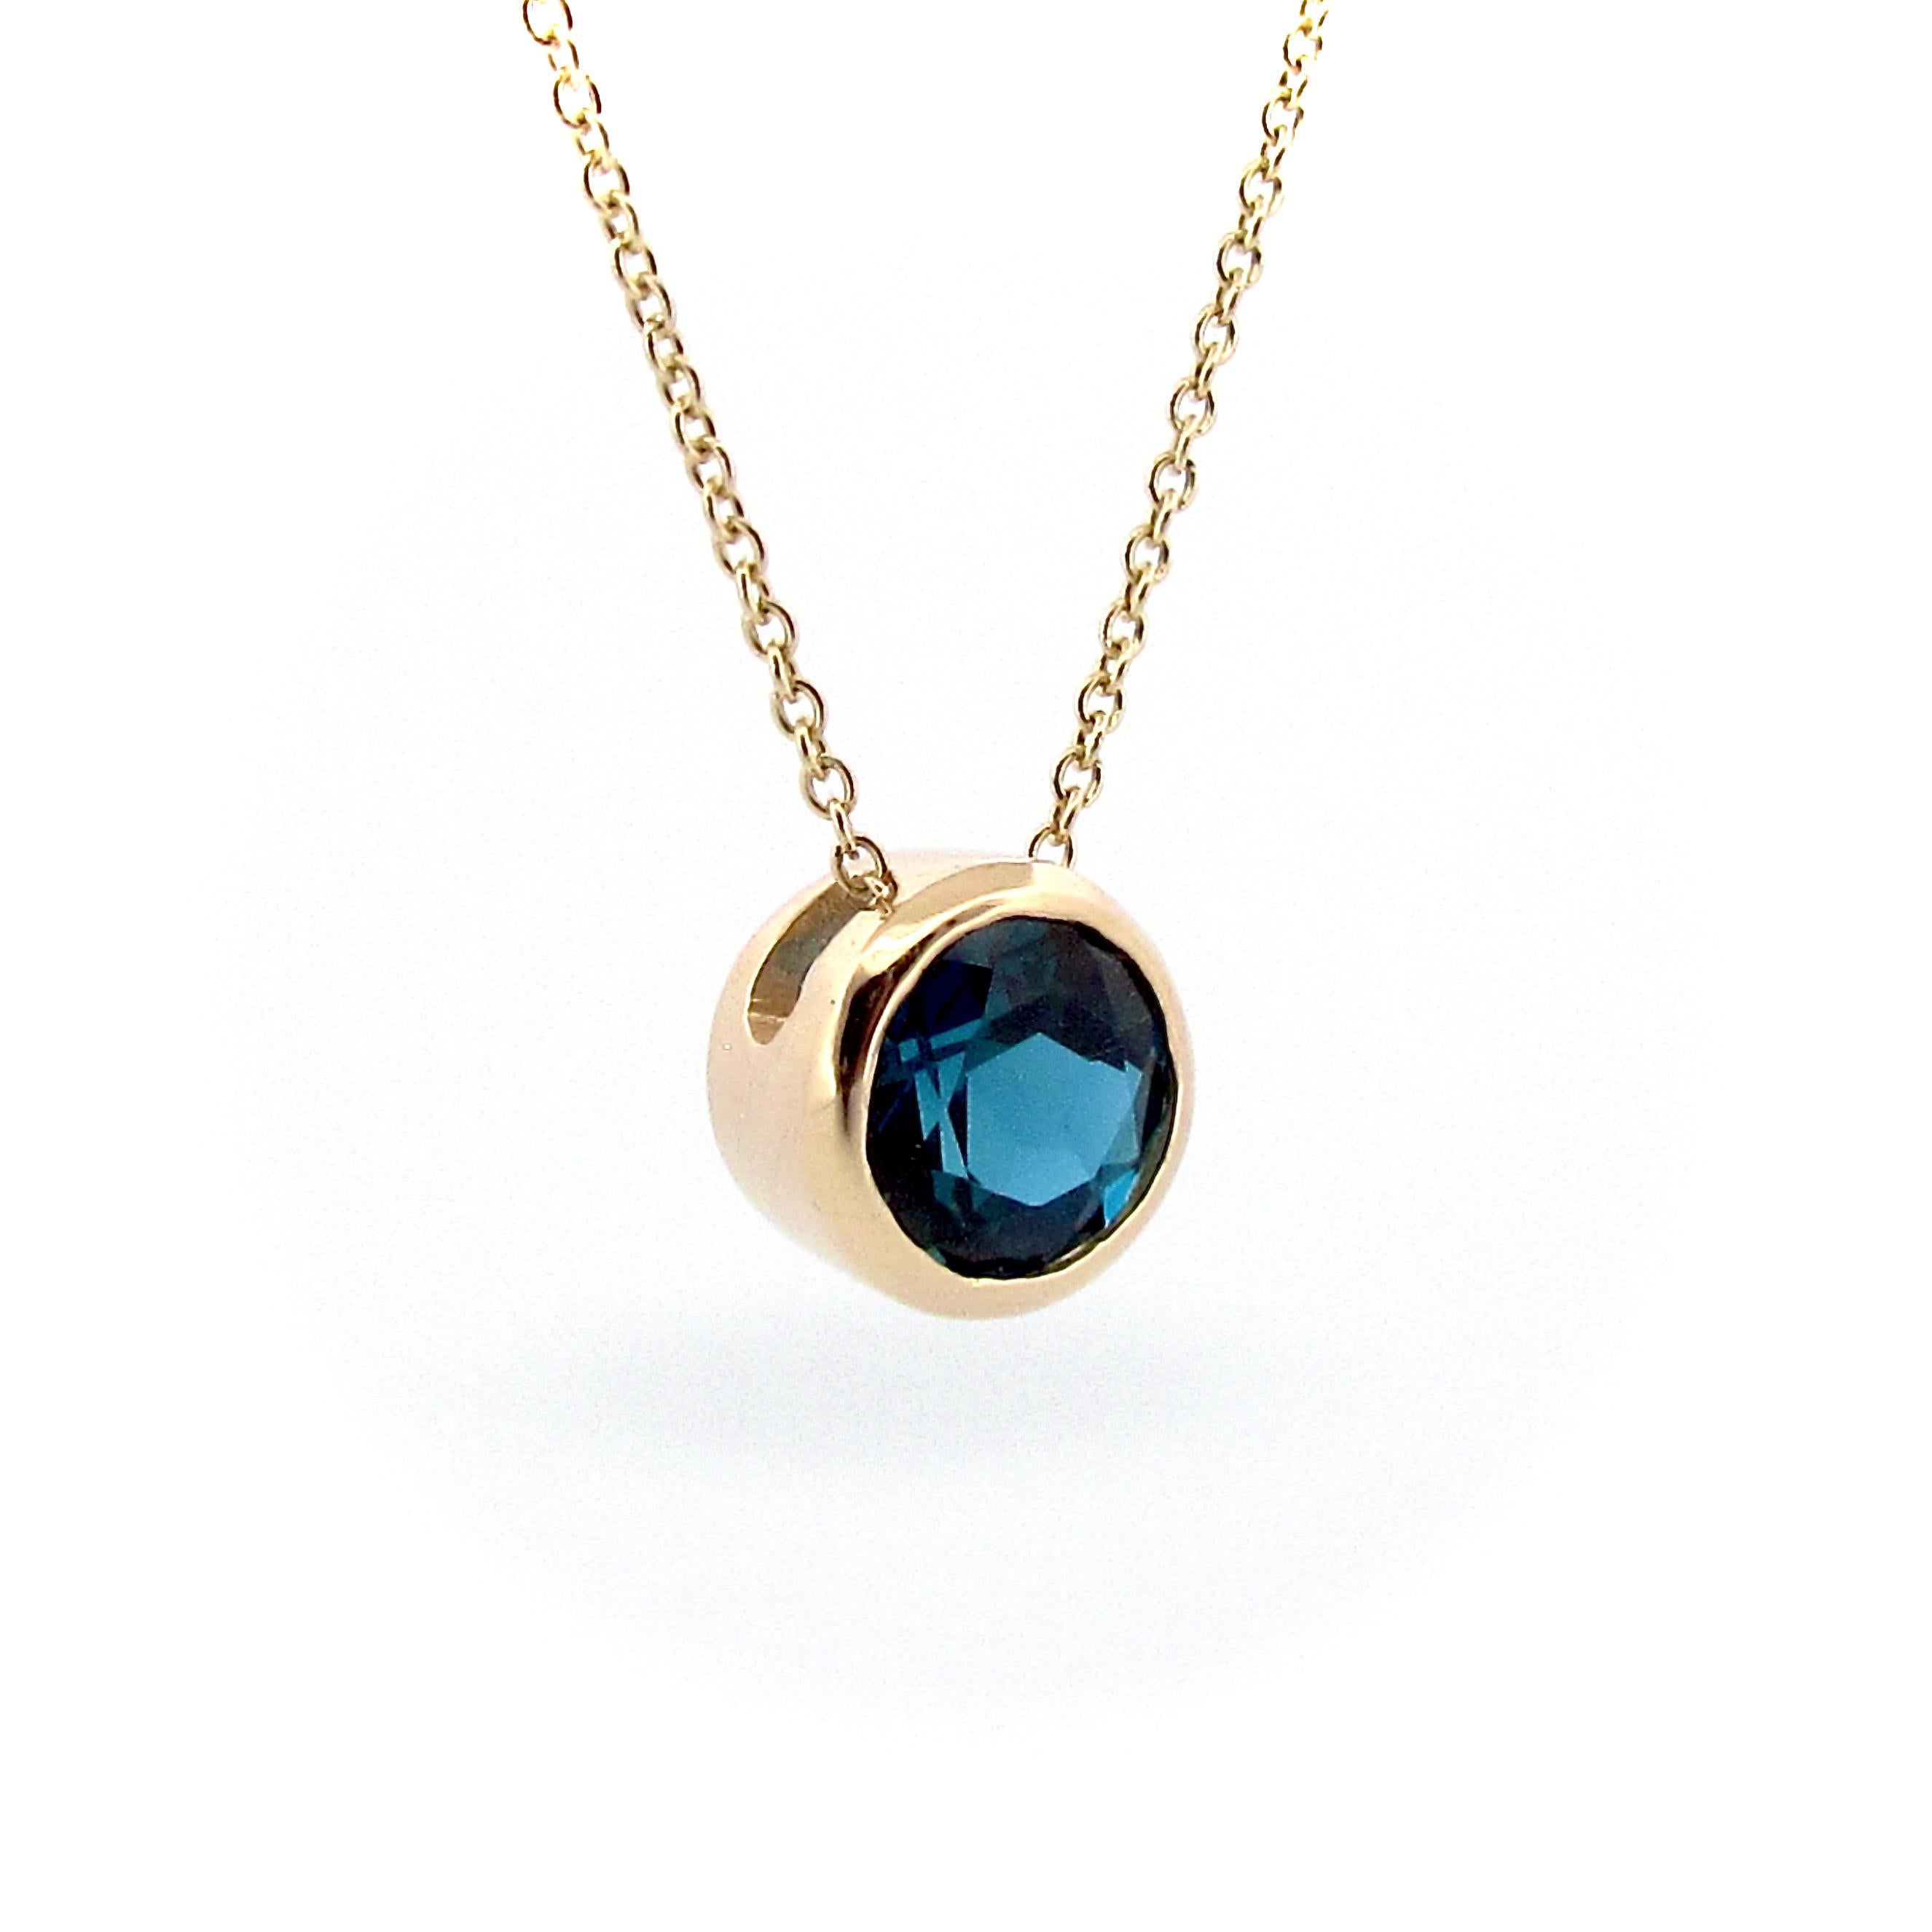 This 9ct solid Gold 7mm Round London Blue Topaz Sliding pendant is beautifully crafted, and comes on a 45cm/18inch 9ct yellow gold cable chain, it is superior in quality and has a nice weight to it. The deep blue hue of the London Blue Topaz